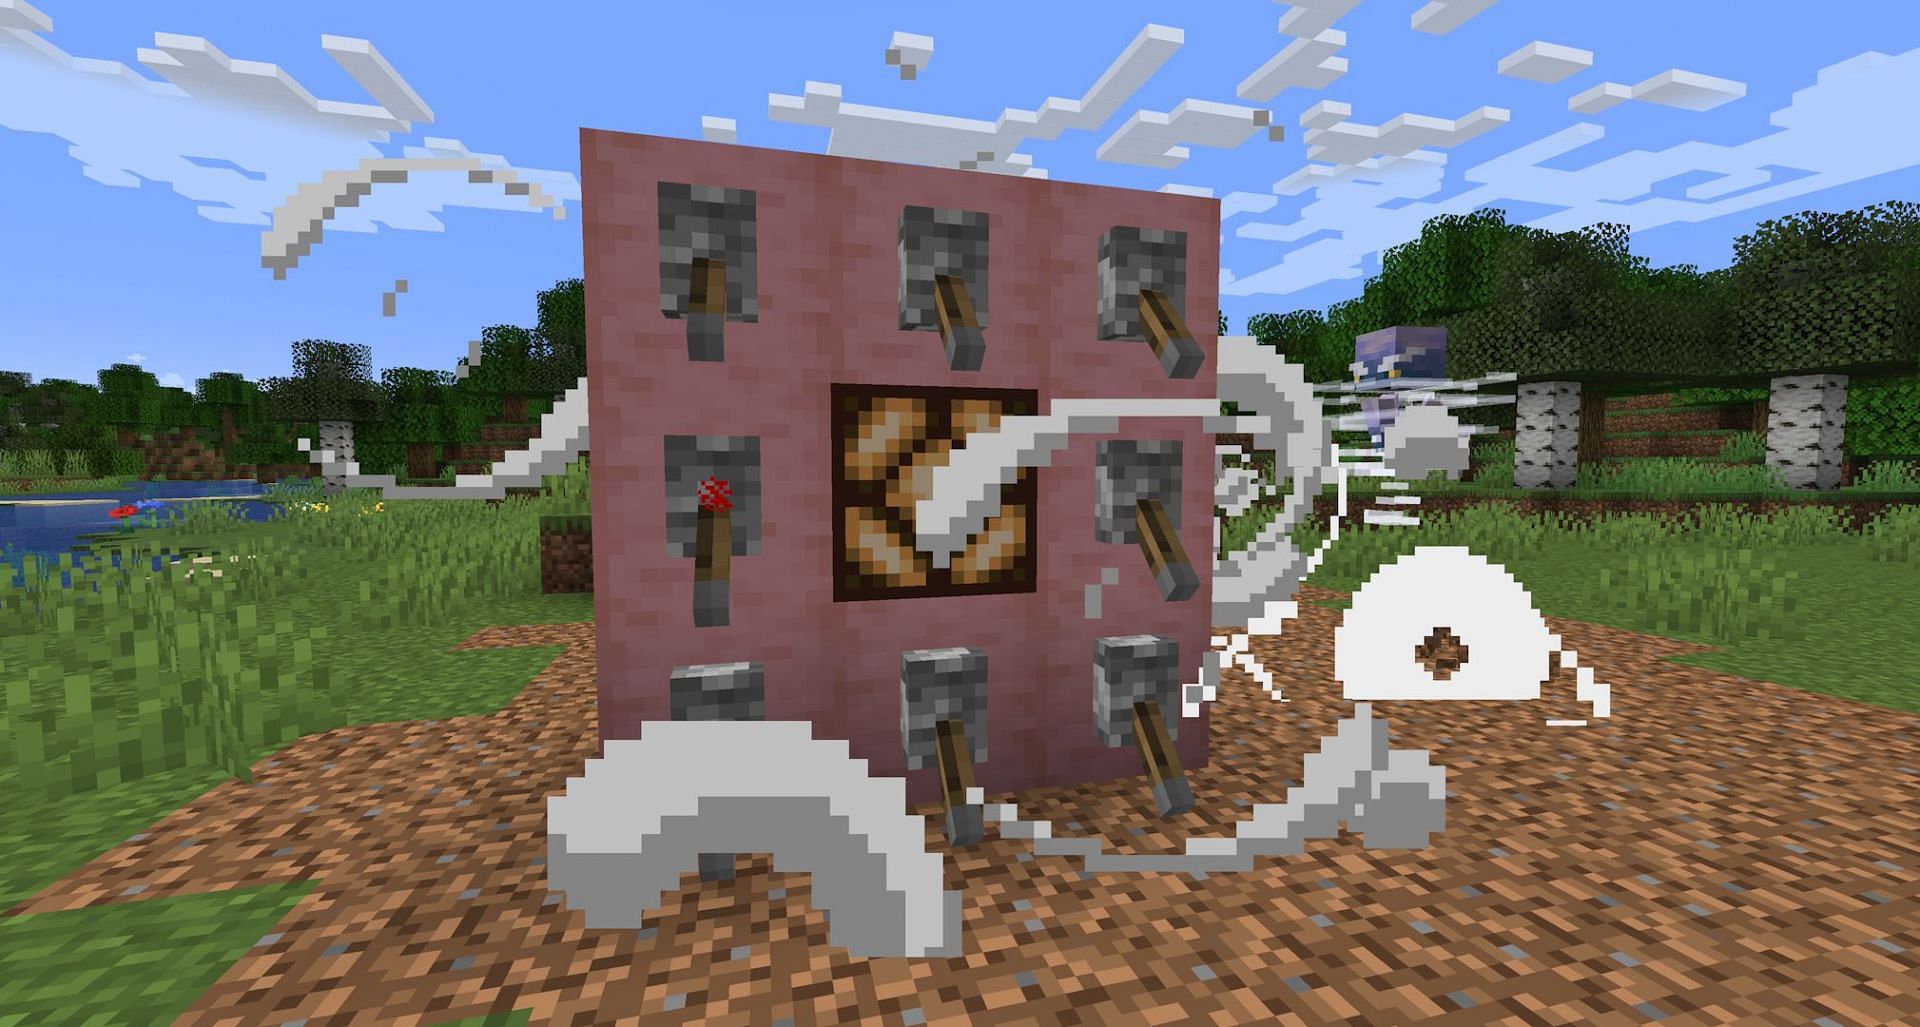 One of the most interesting things about the breeze is the potential redstone uses (Image via Mojang)